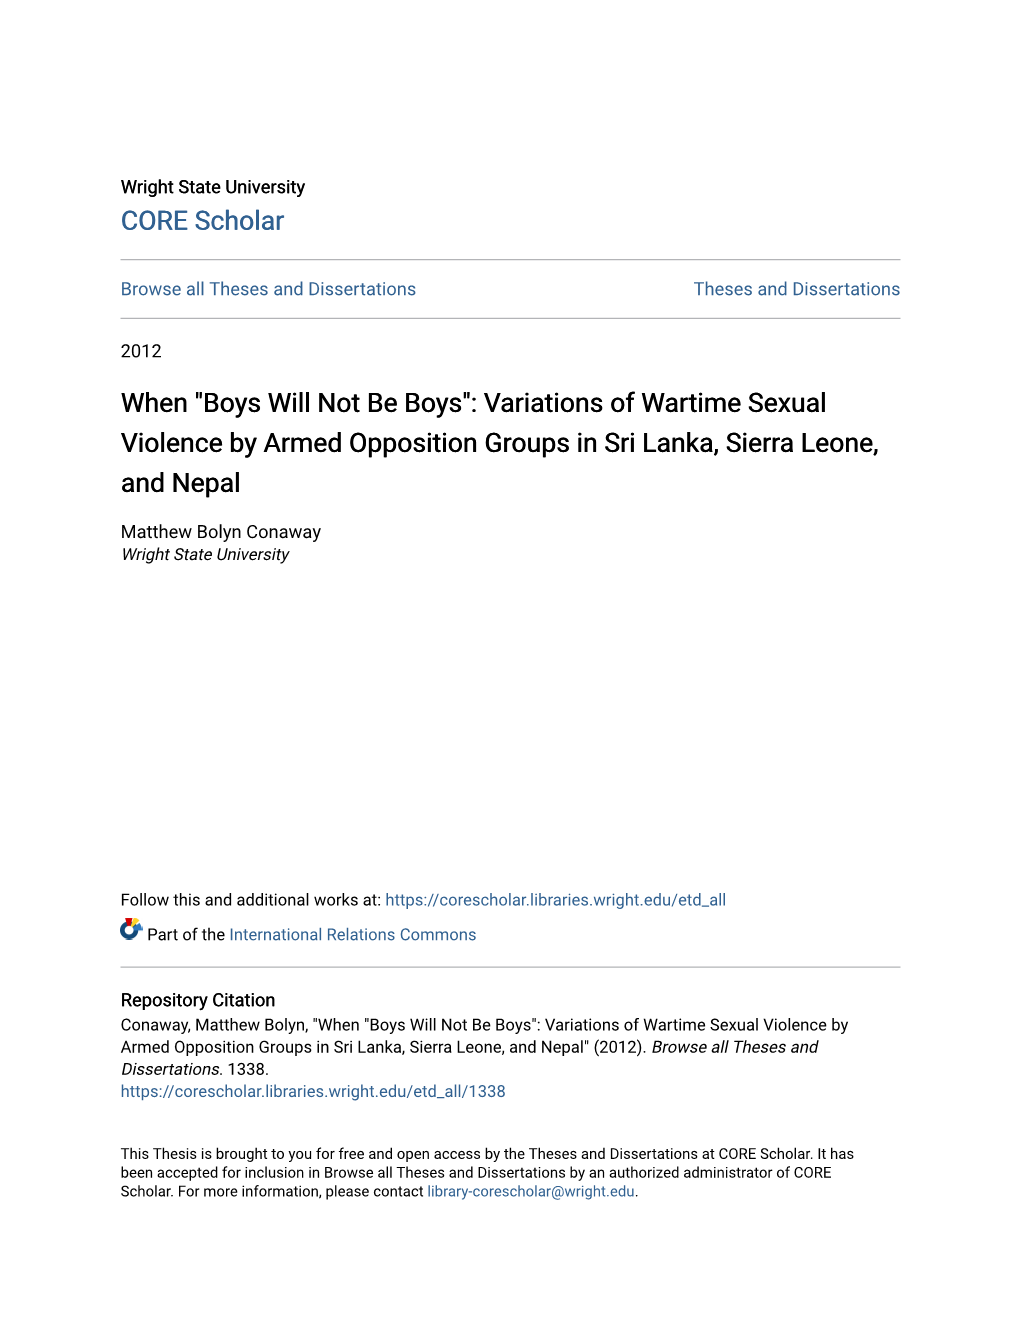 Variations of Wartime Sexual Violence by Armed Opposition Groups in Sri Lanka, Sierra Leone, and Nepal